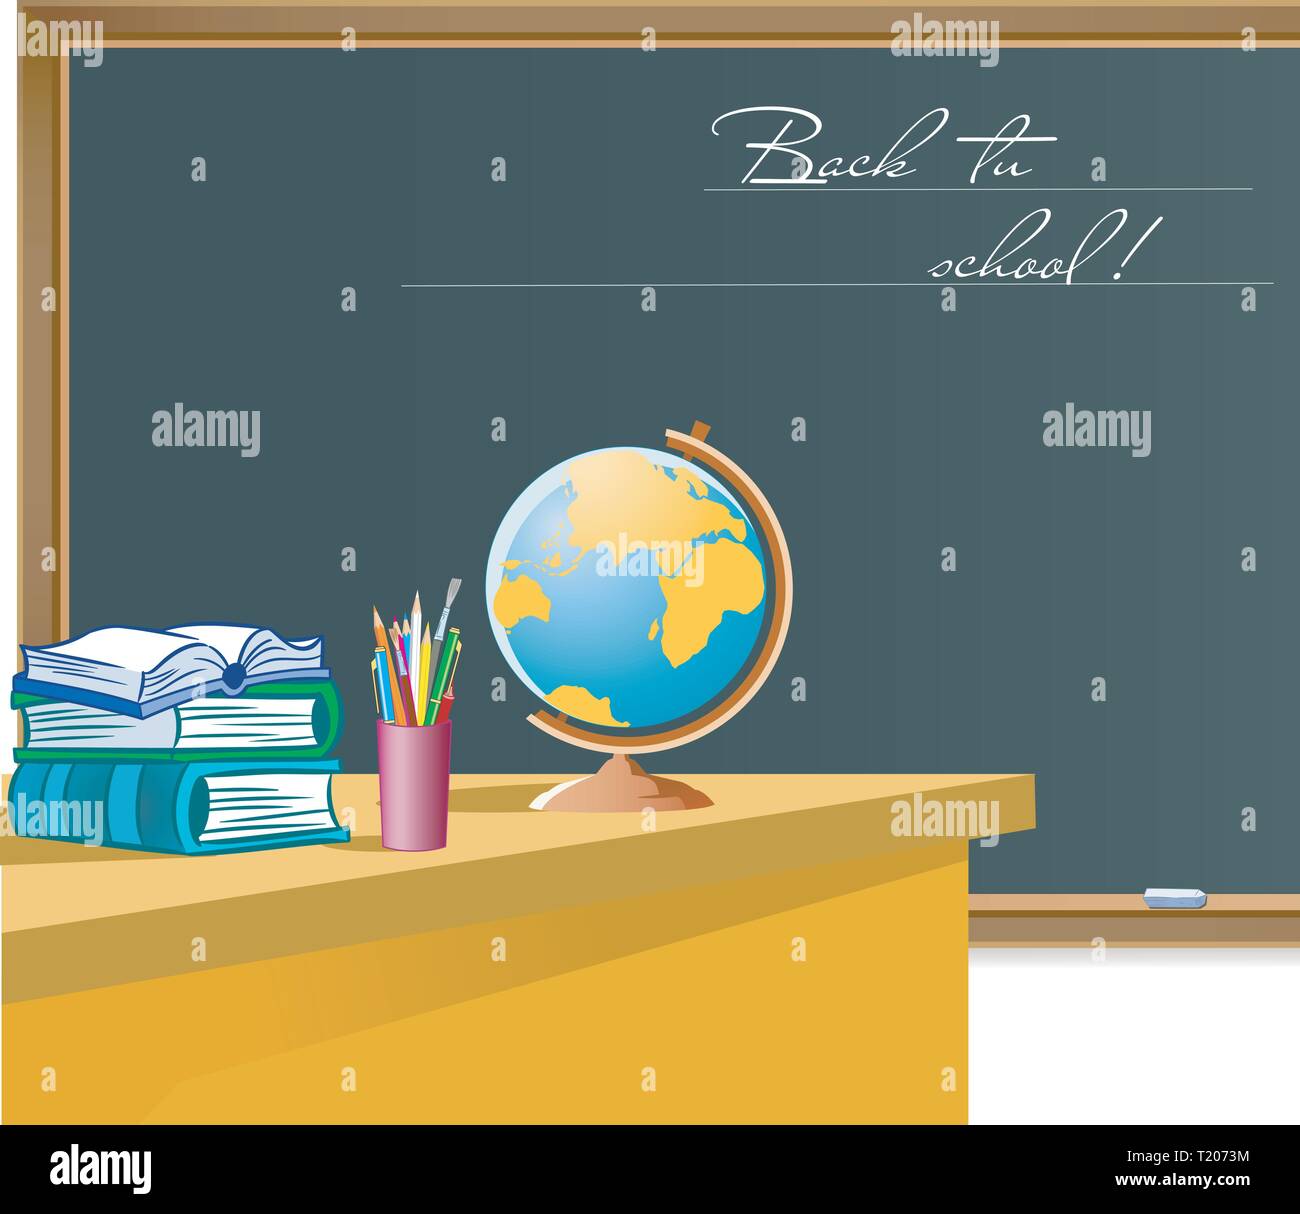 The illustration shows a design element of the classroom with school subjects and attributes. Illustration done on separate layers. Stock Vector